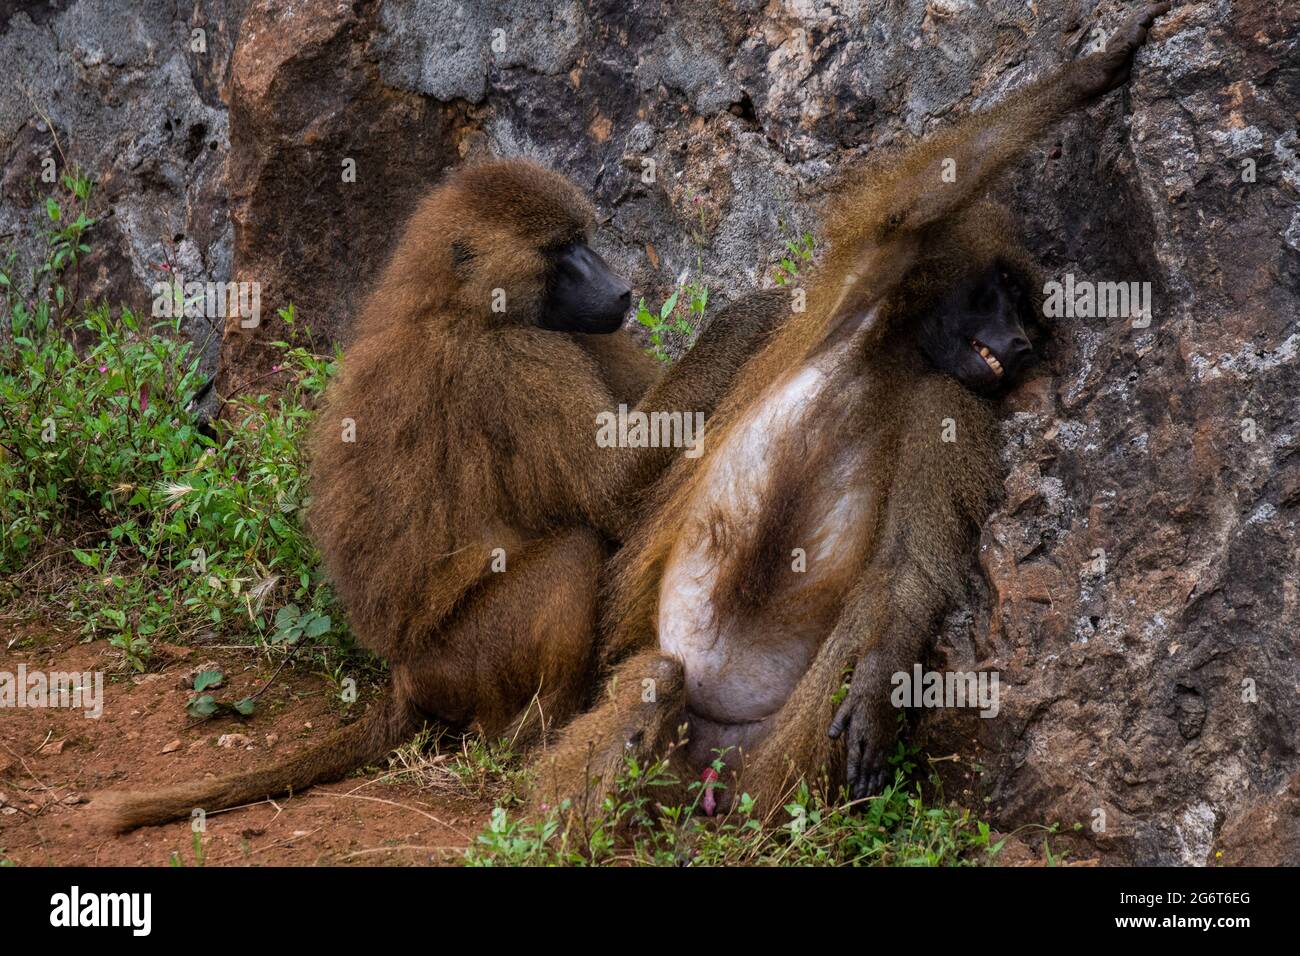 Guinea baboon (Papio papio) monkeys deworming in Cabarceno Nature Park. The Cabarceno Nature Park is not a conventional zoo. It is an area of 750 hect Stock Photo